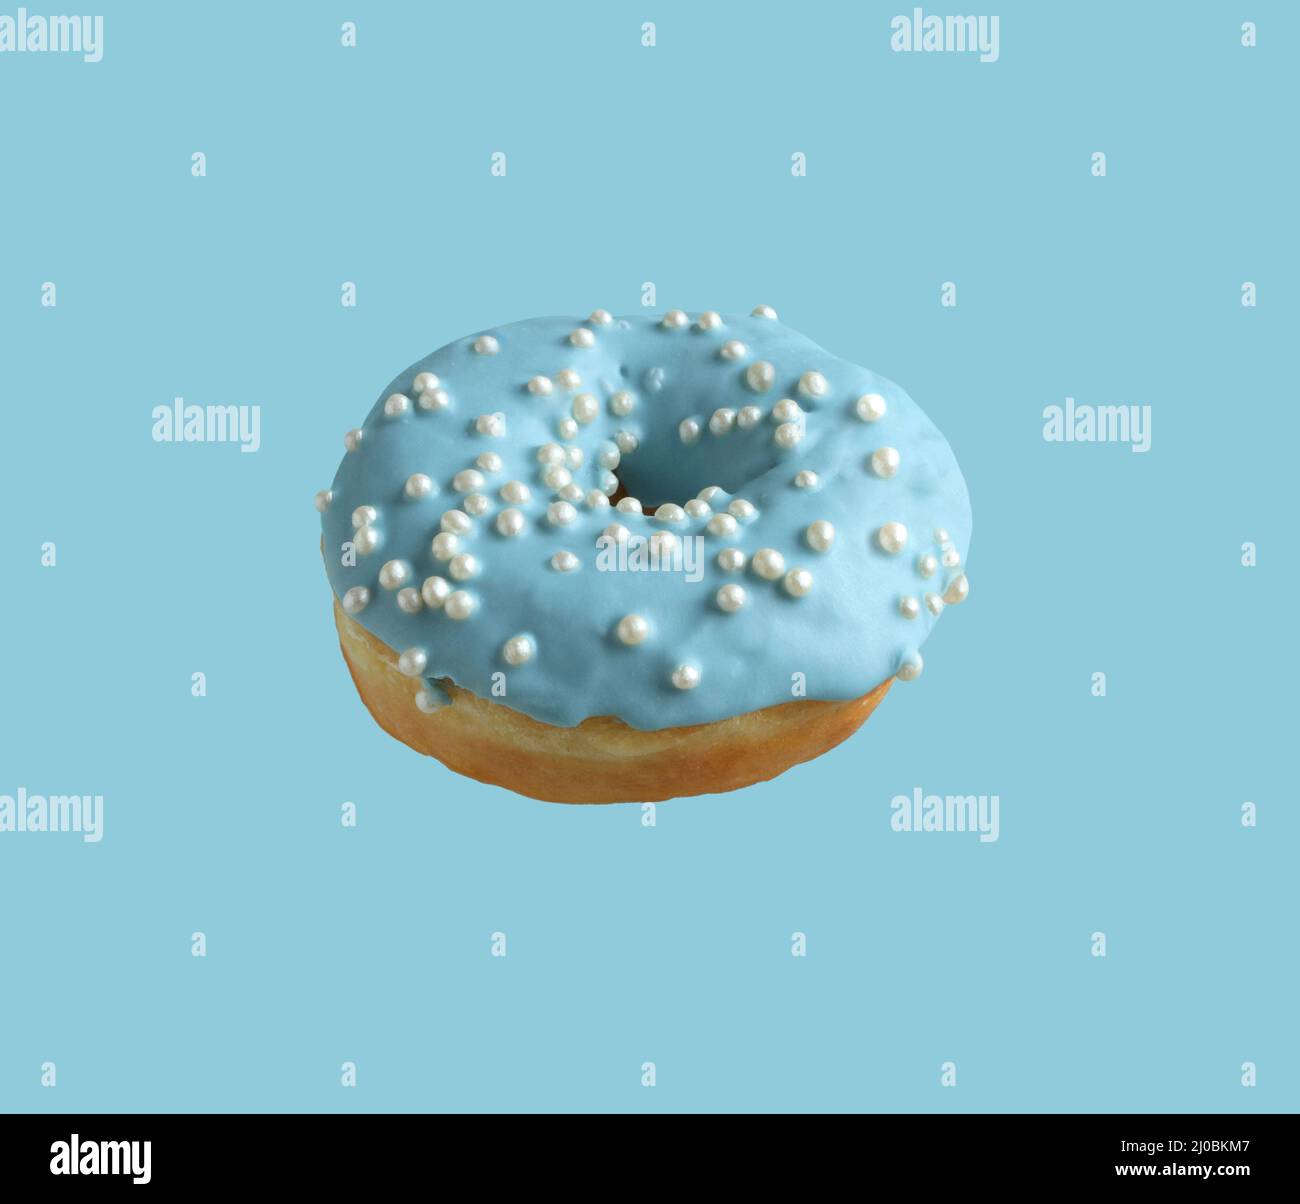 Donuts covered with pale blue icing and sprinkled with pearl sugar beads on a light blue background. Closeup Stock Photo